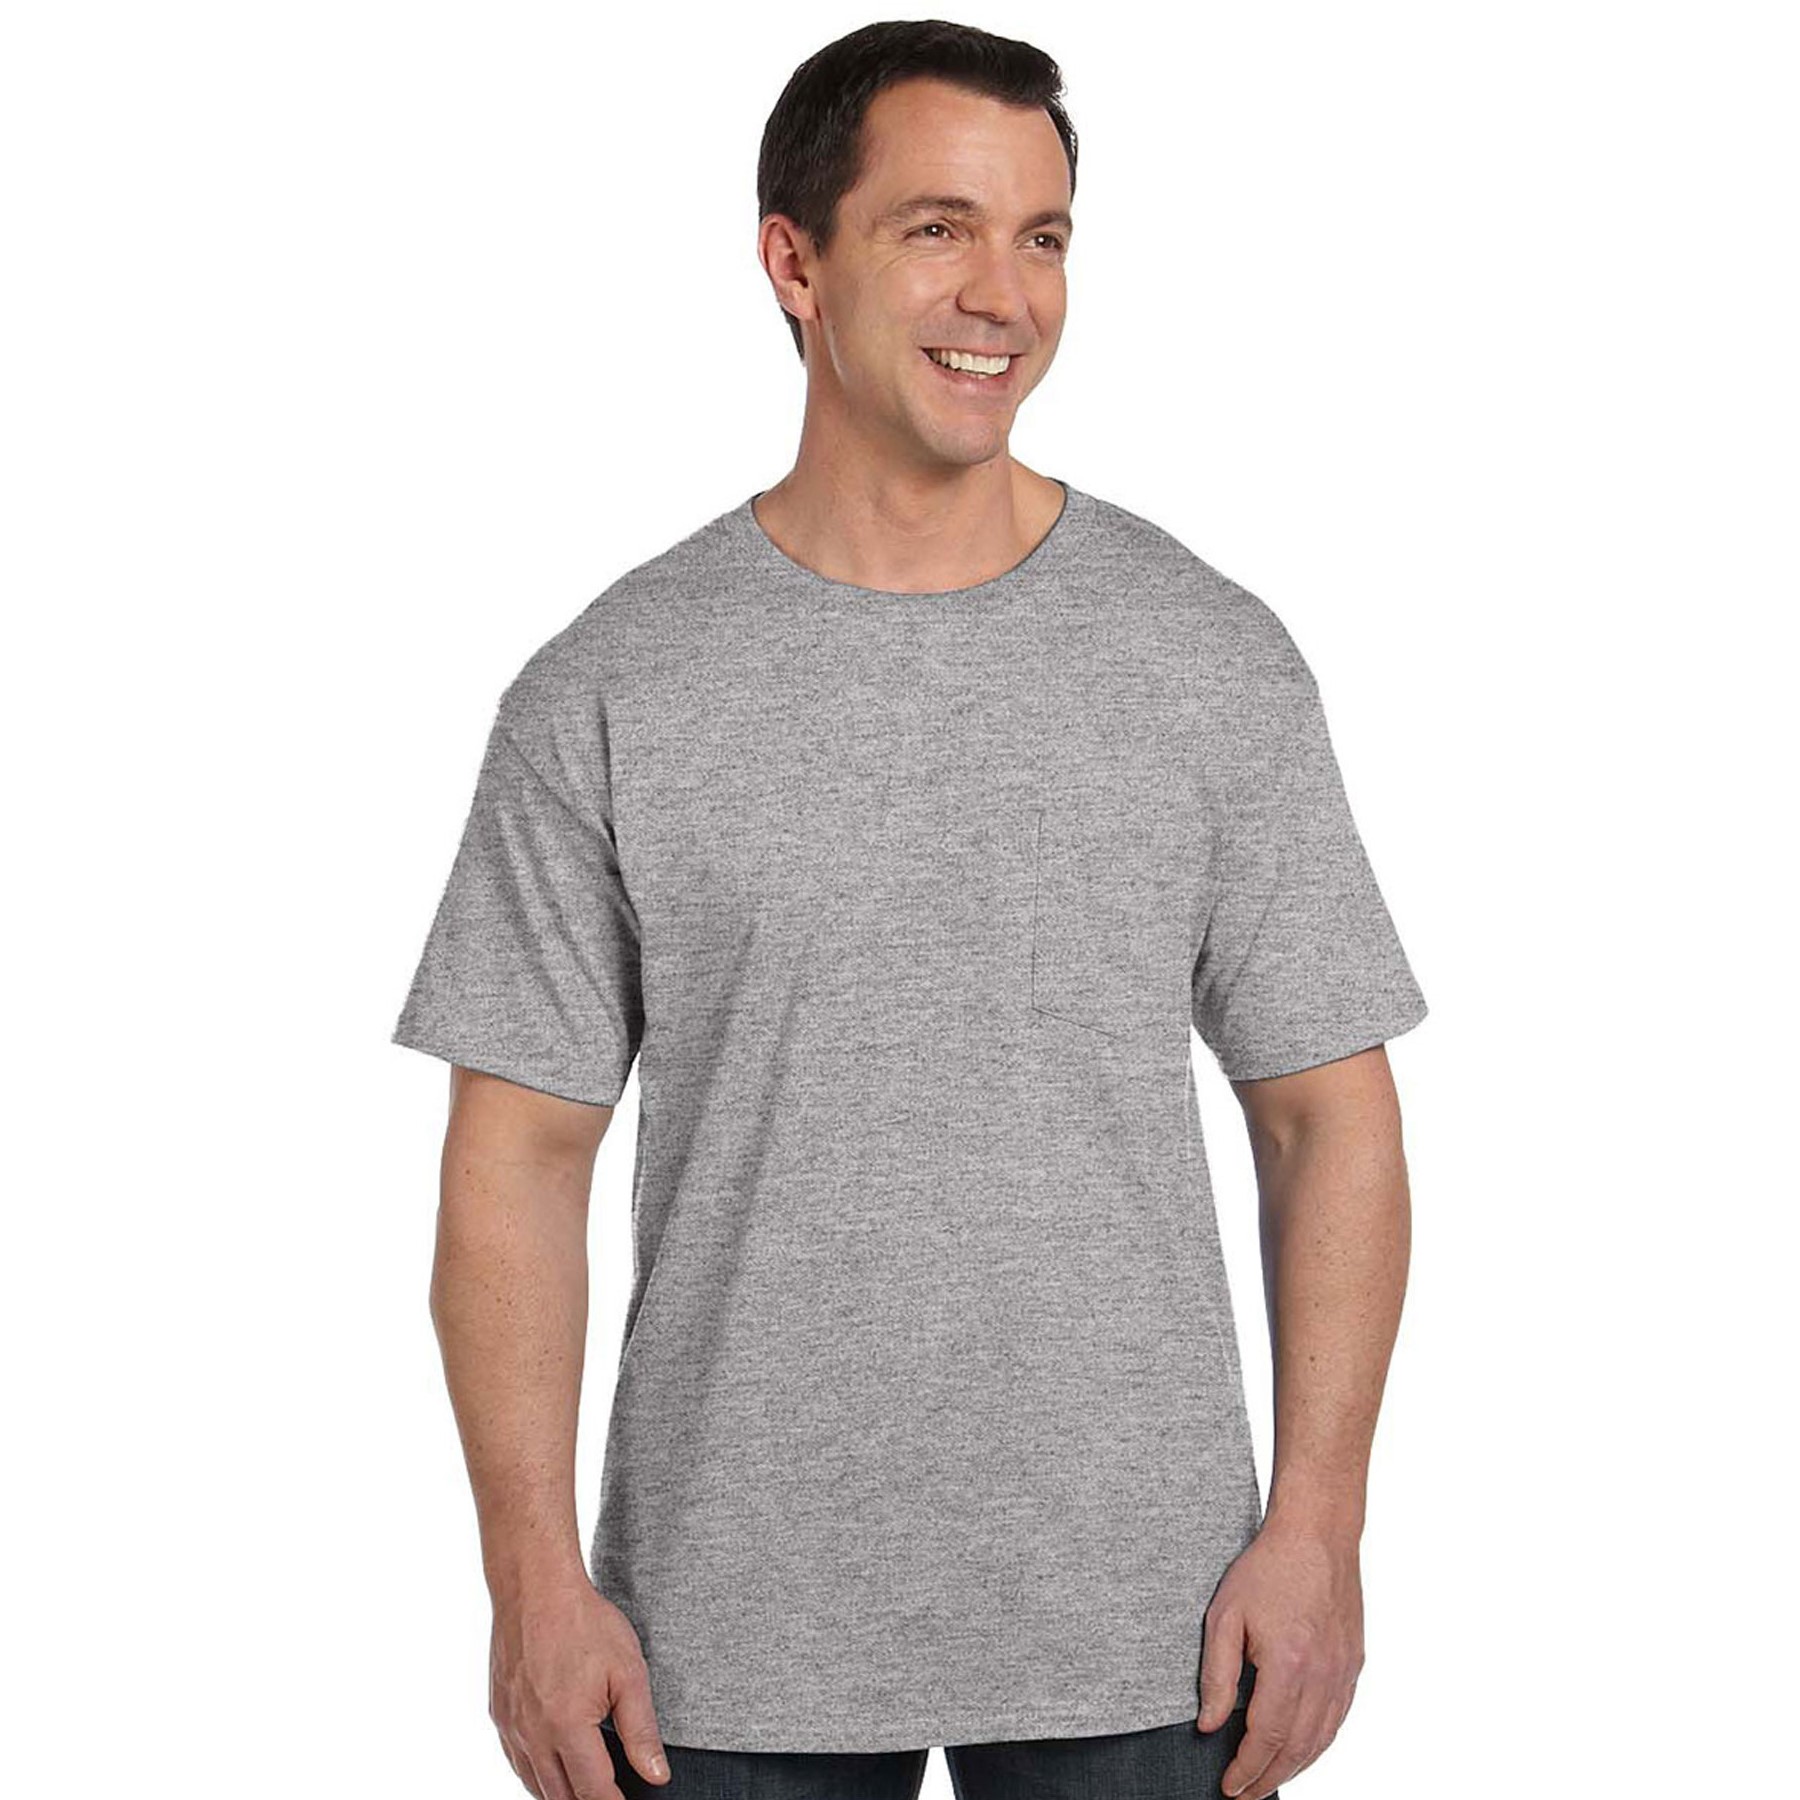 SANMAR HANES BEEFY COTTON T-SHIRT WITH POCKET